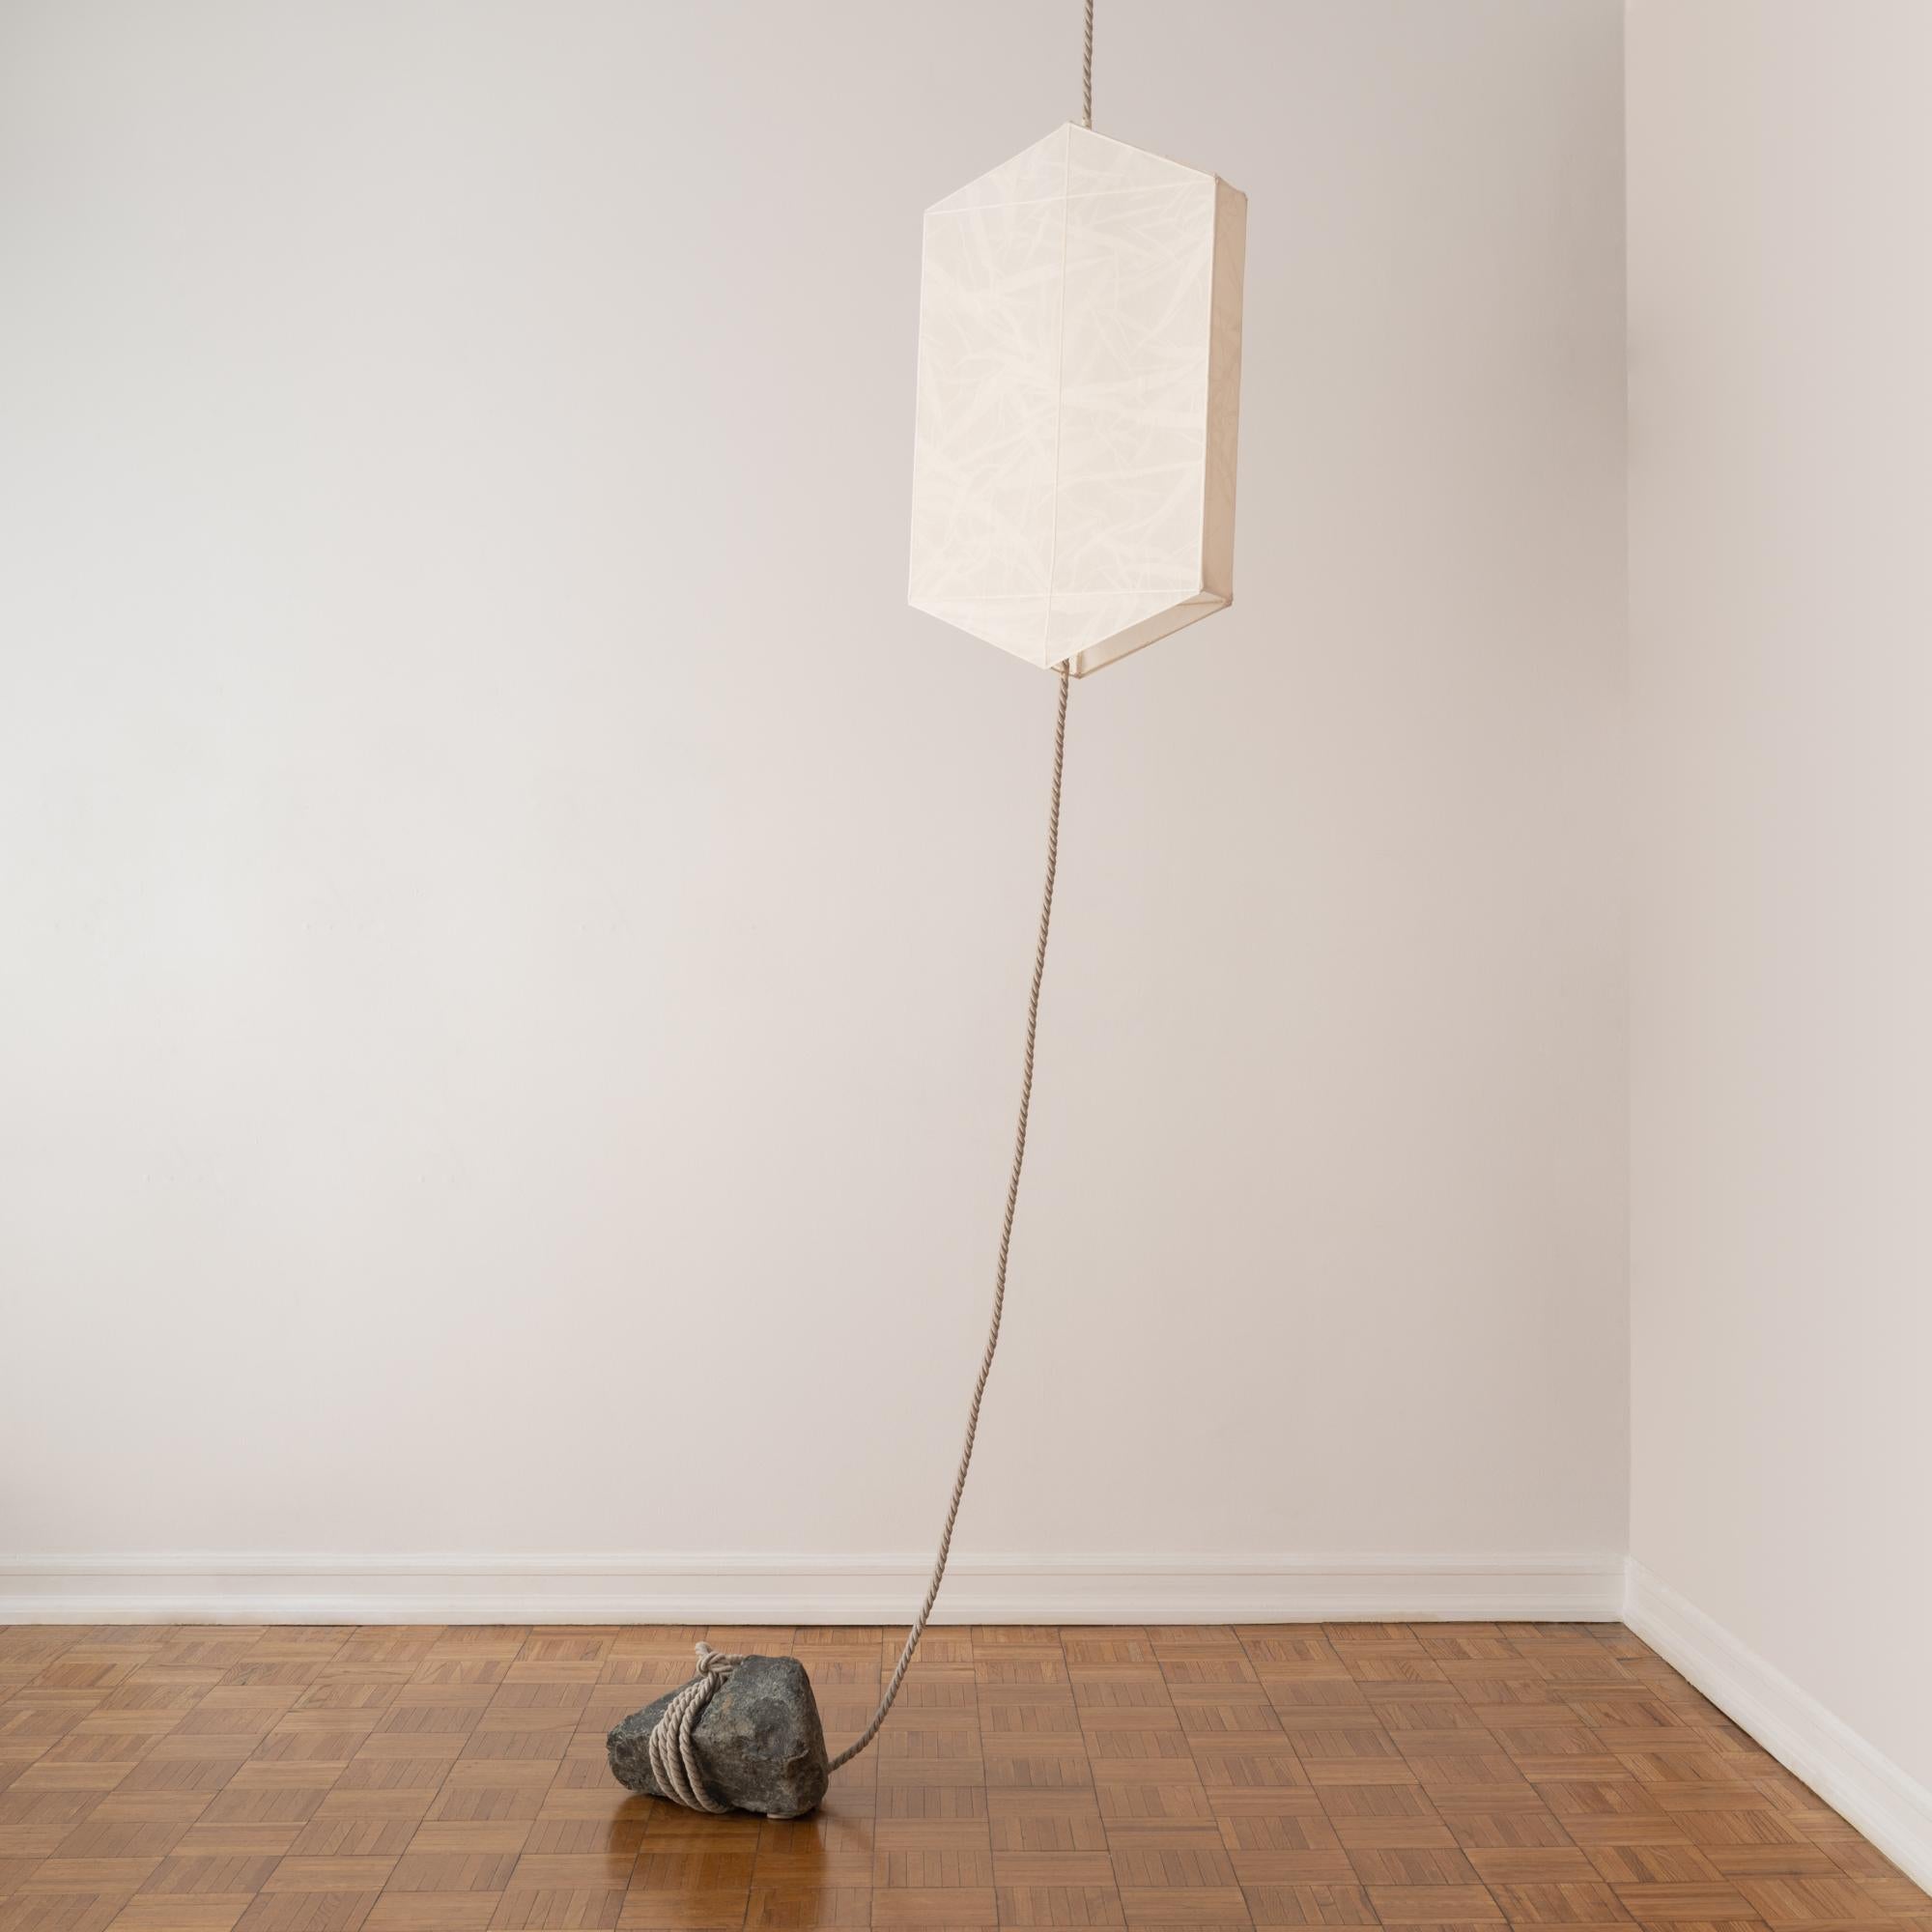 American One-of-a-Kind Hanging Lantern-style Lamp of Silk Organza, Rope and Raw Stone For Sale